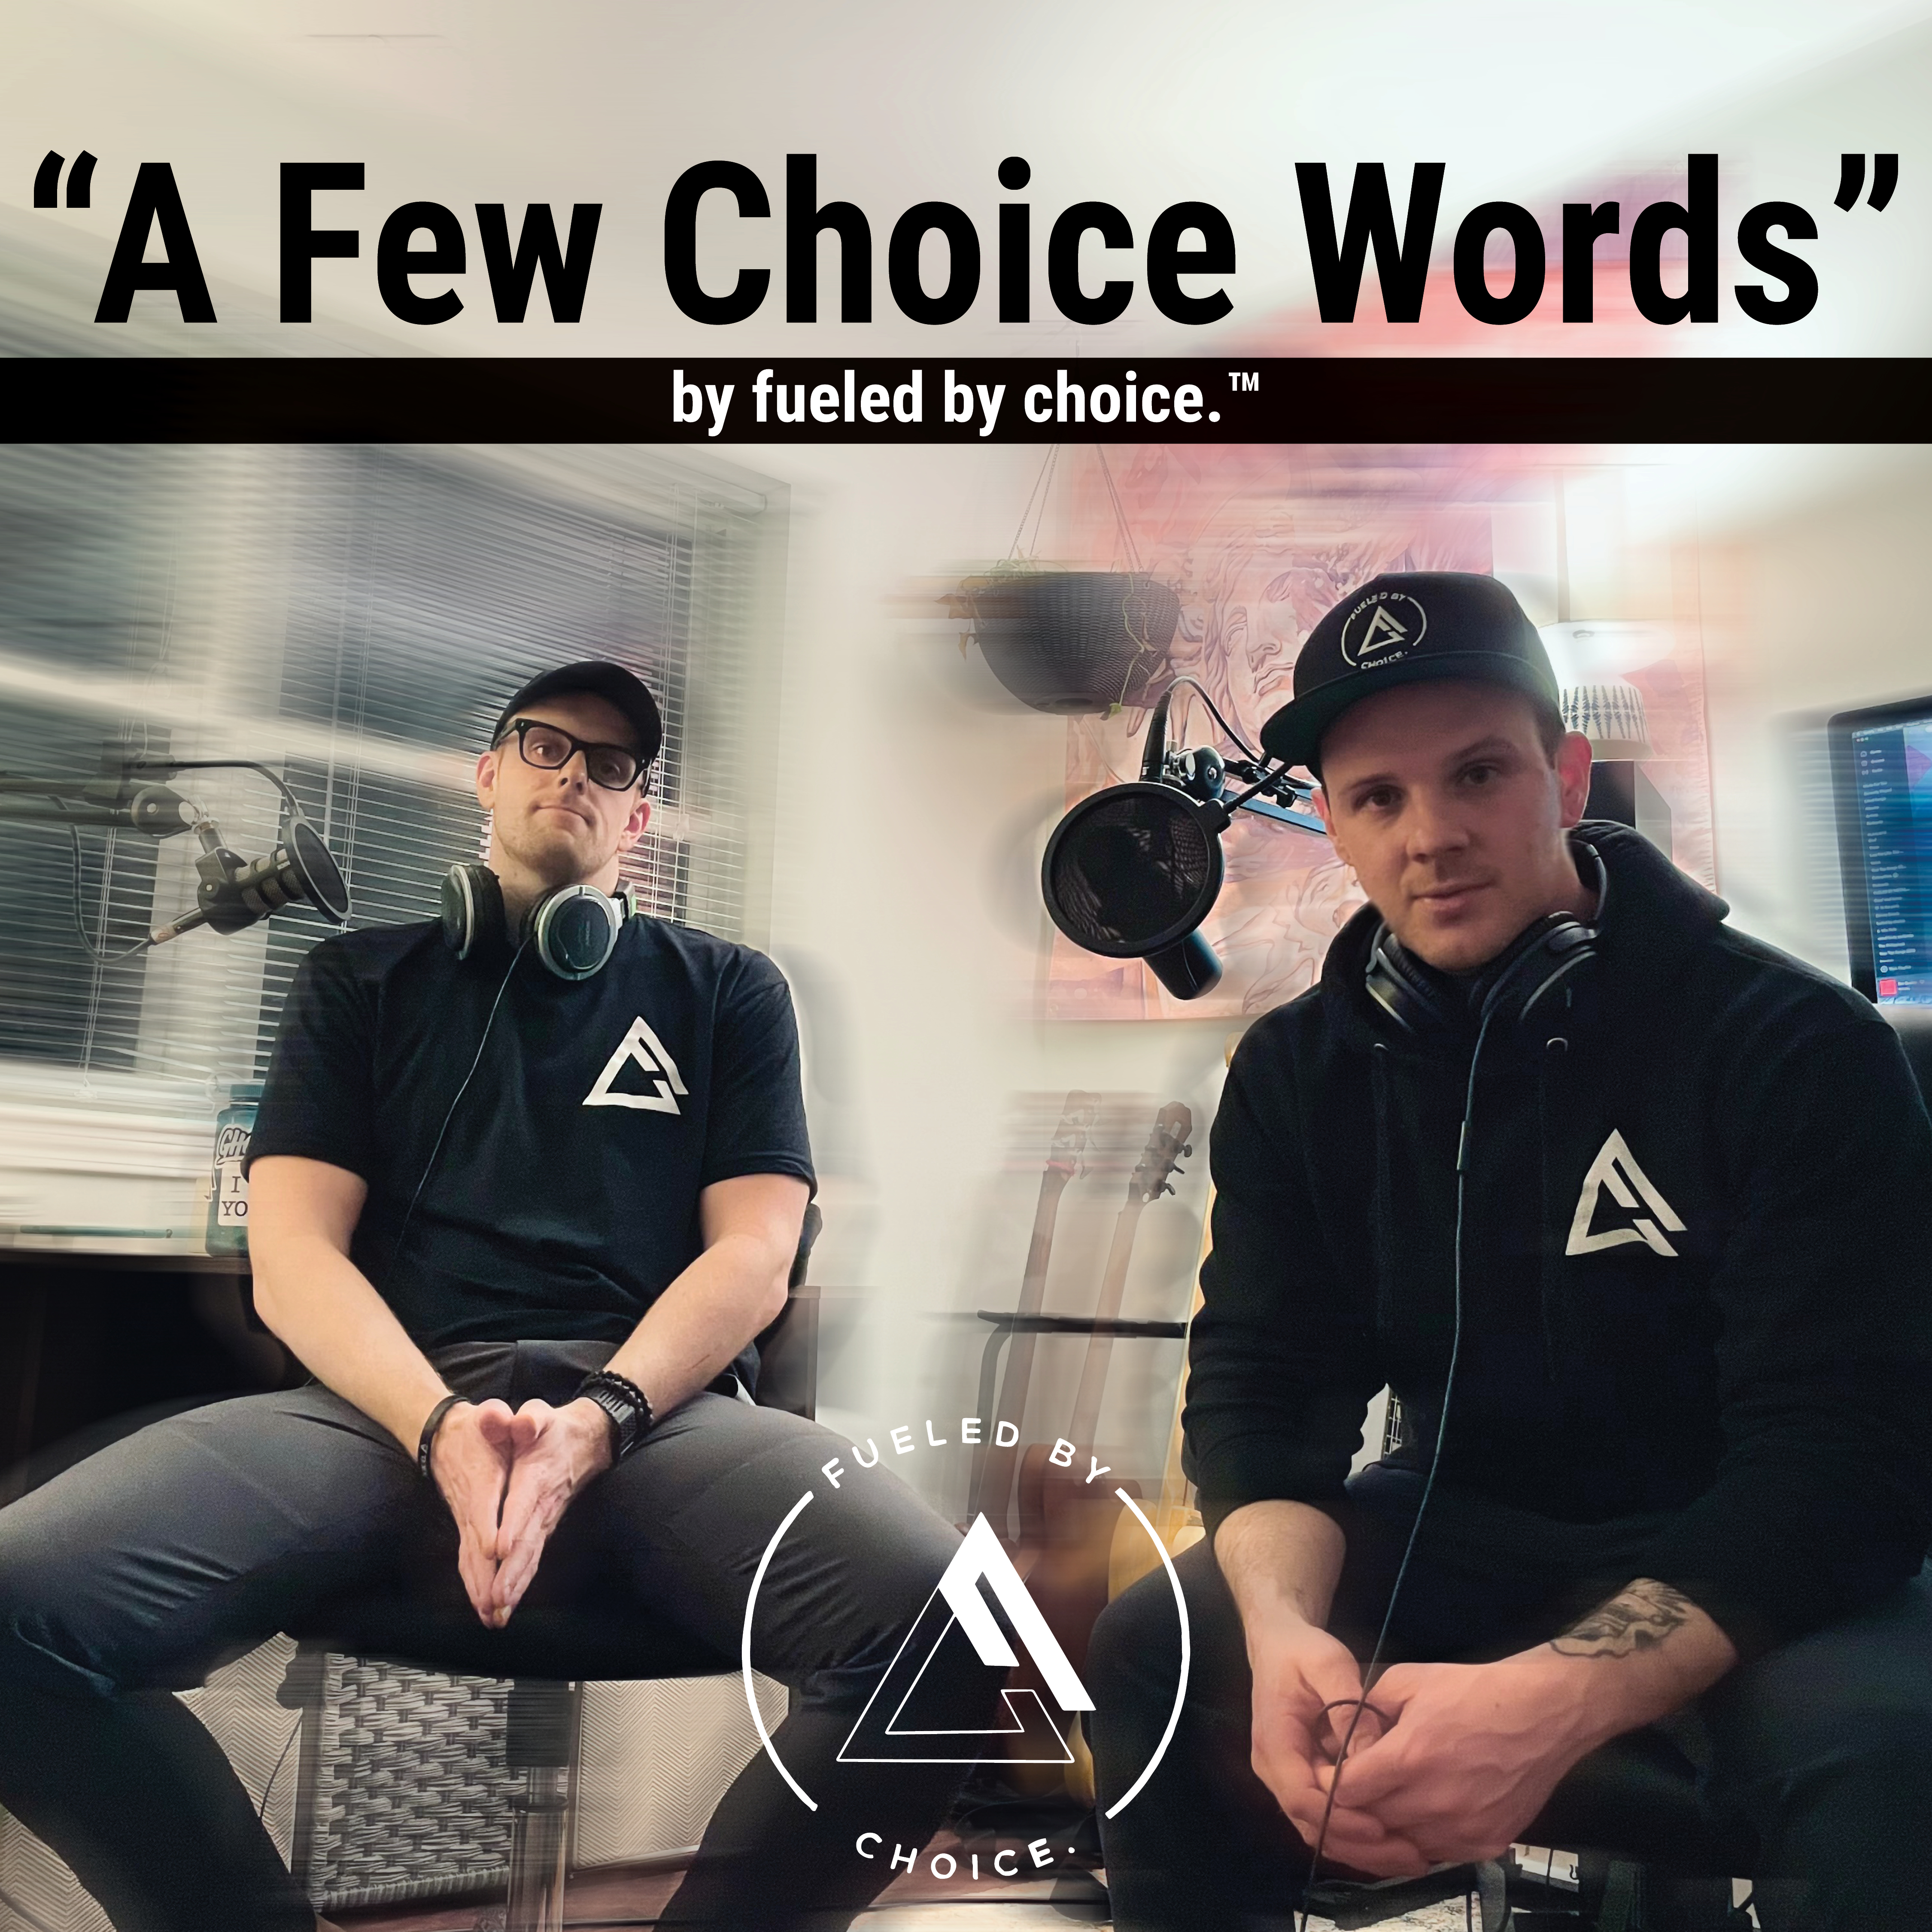 The official fueled by choice.™ pod snack, if you will. A tasty morsel of inspiration and stories of choice...from some of our favorite humans in the world.